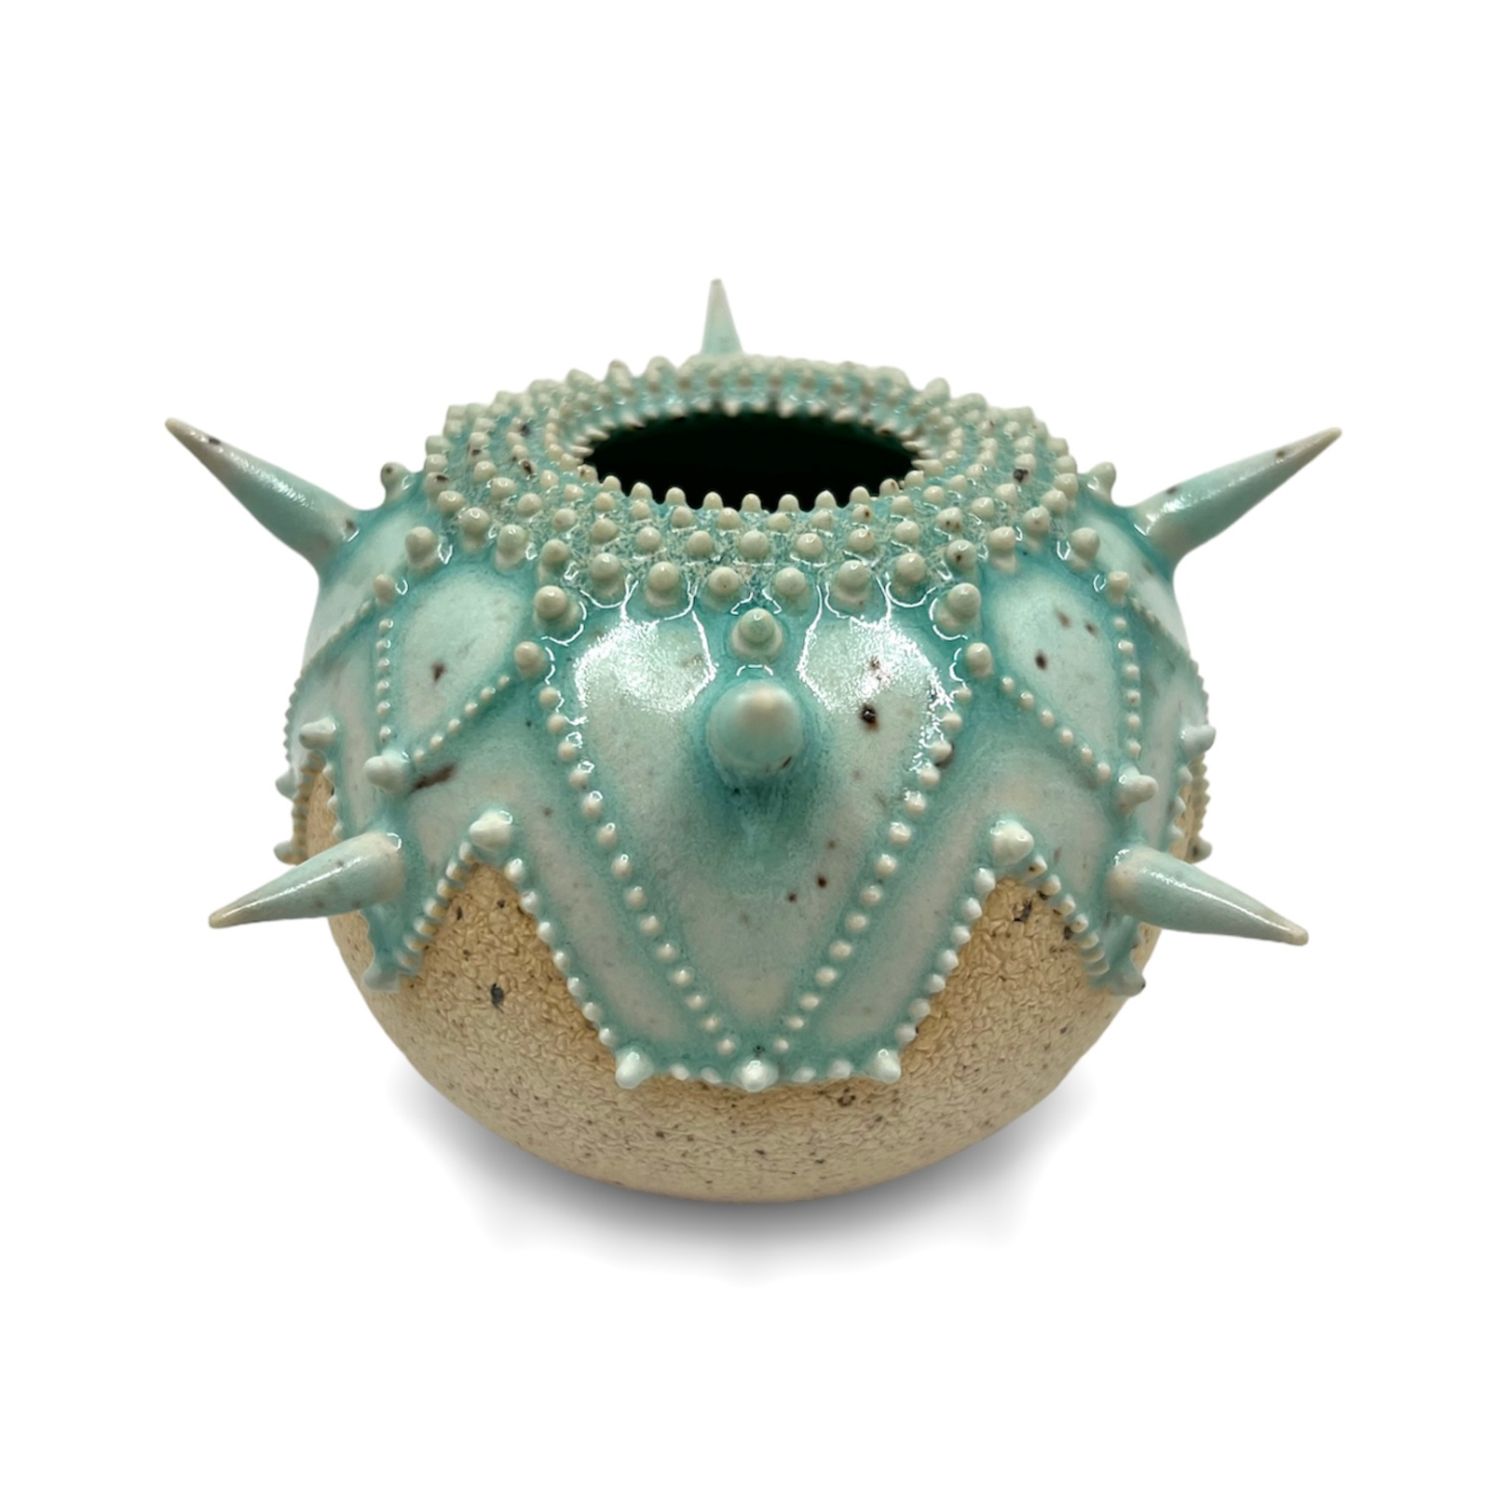 Zara Gardner: Turquoise Sculpture with Spikes Product Image 3 of 6